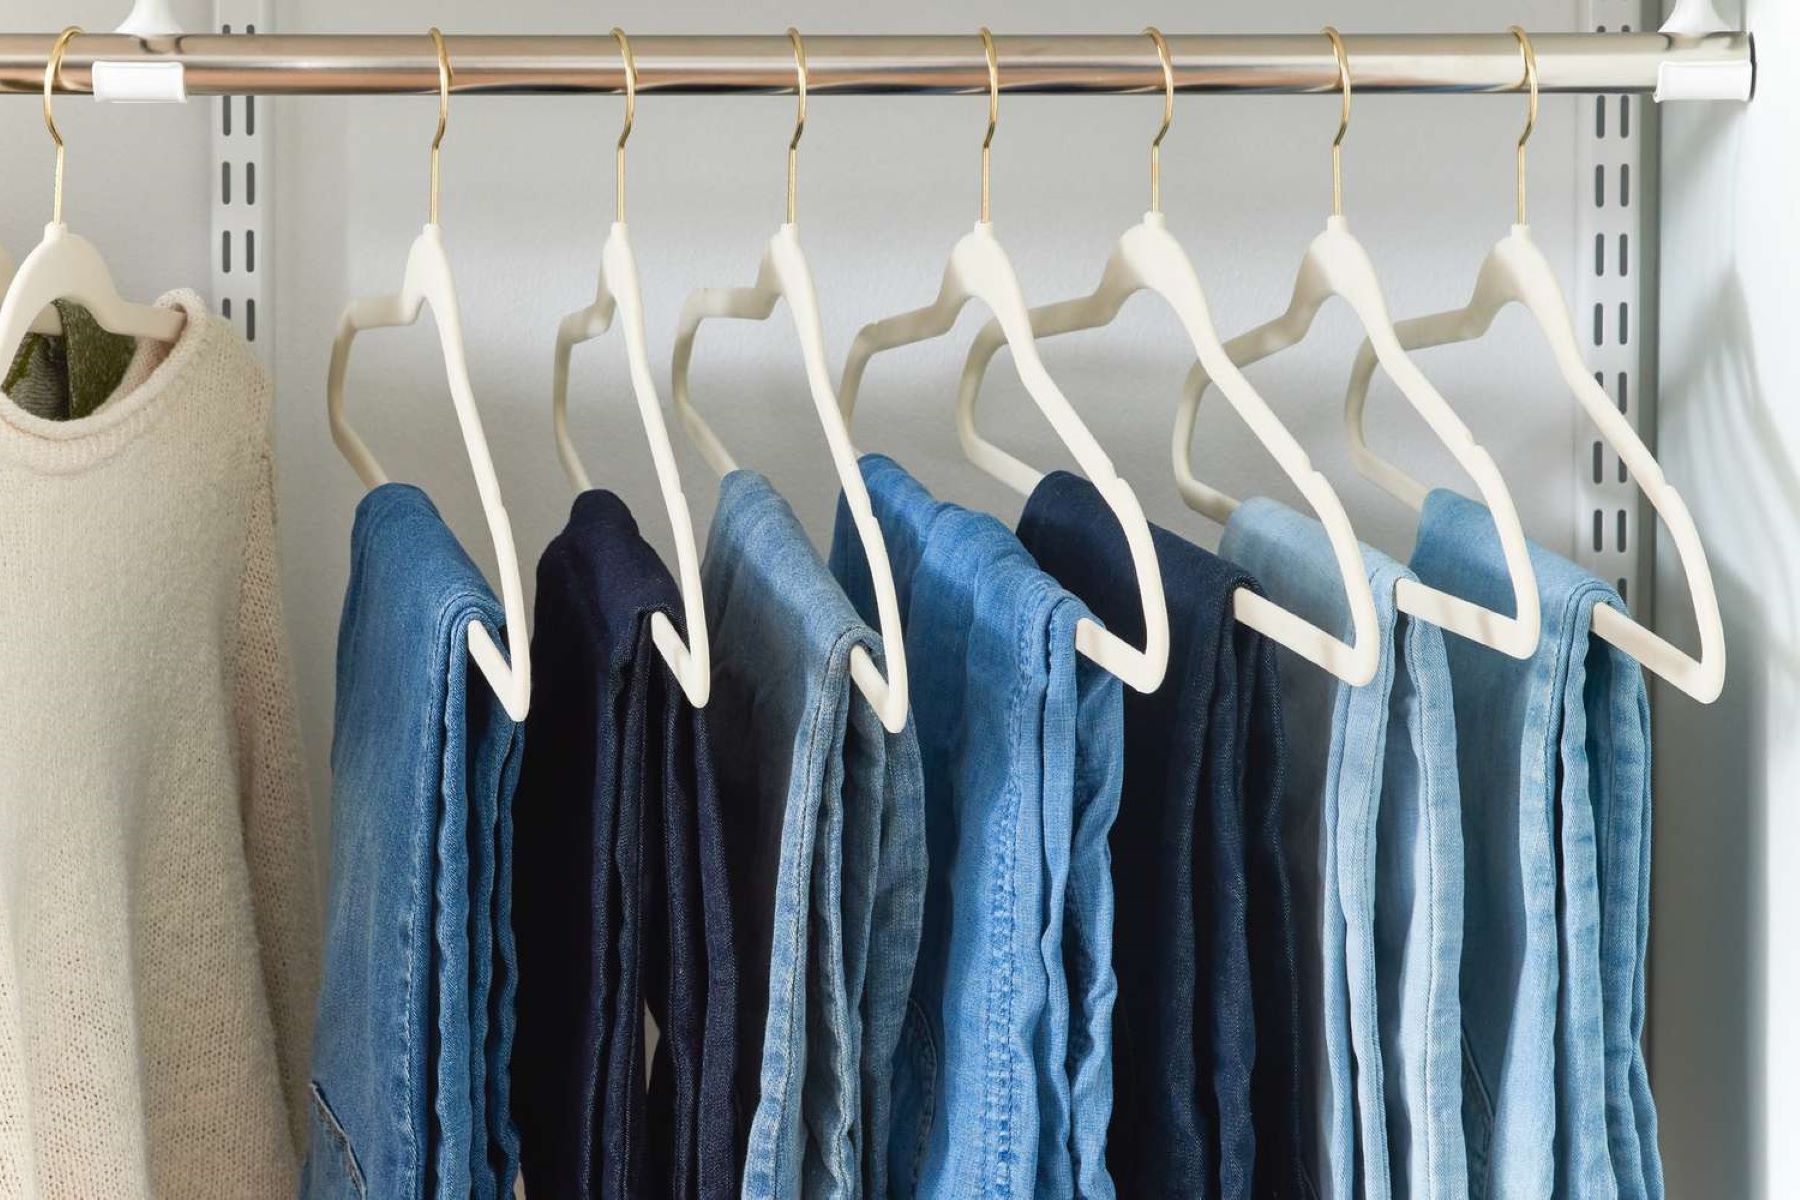 How To Fold Pants On A Hanger